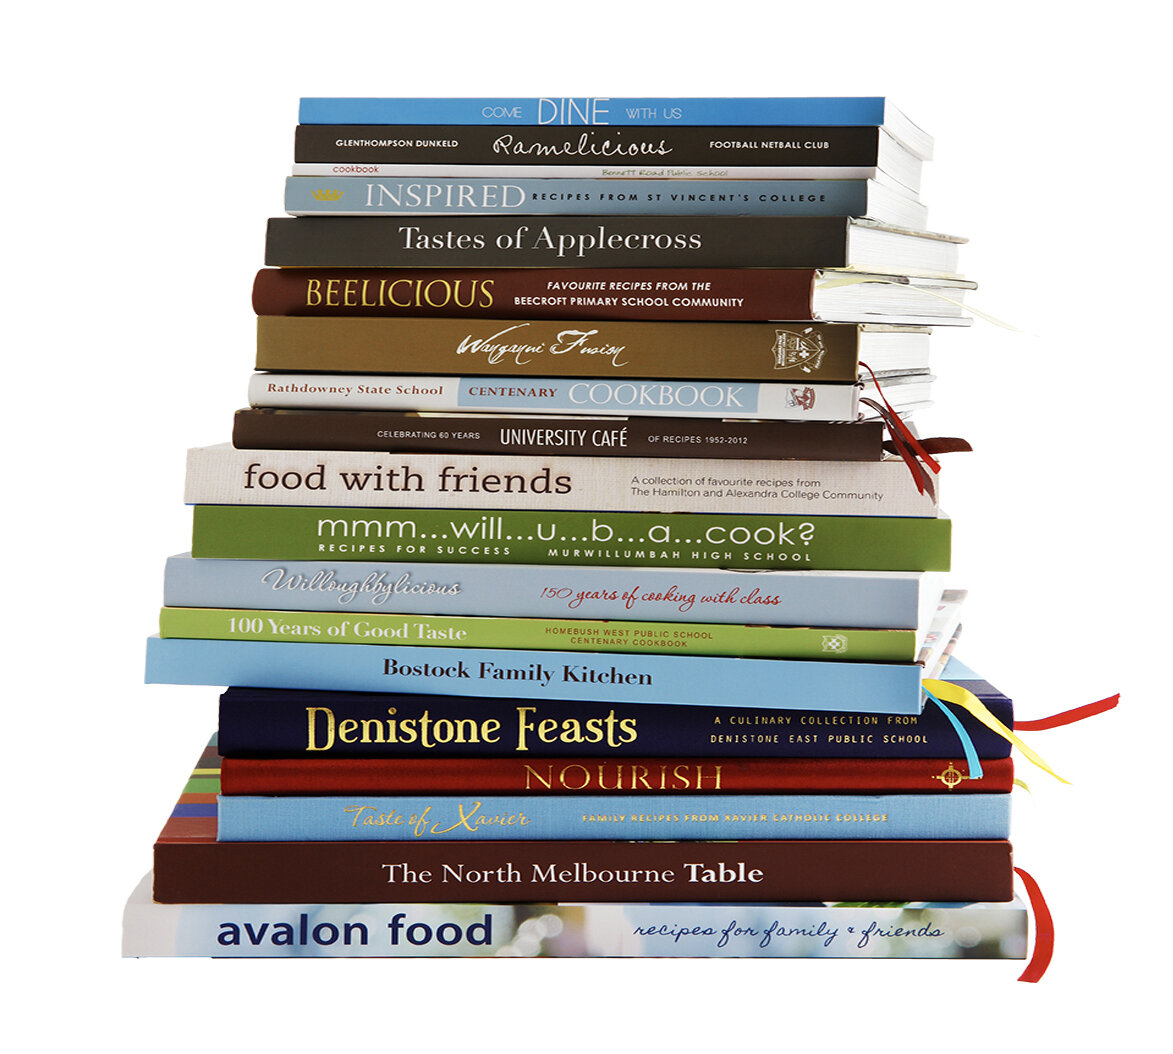 Printing & Creating Your Own Cookbook